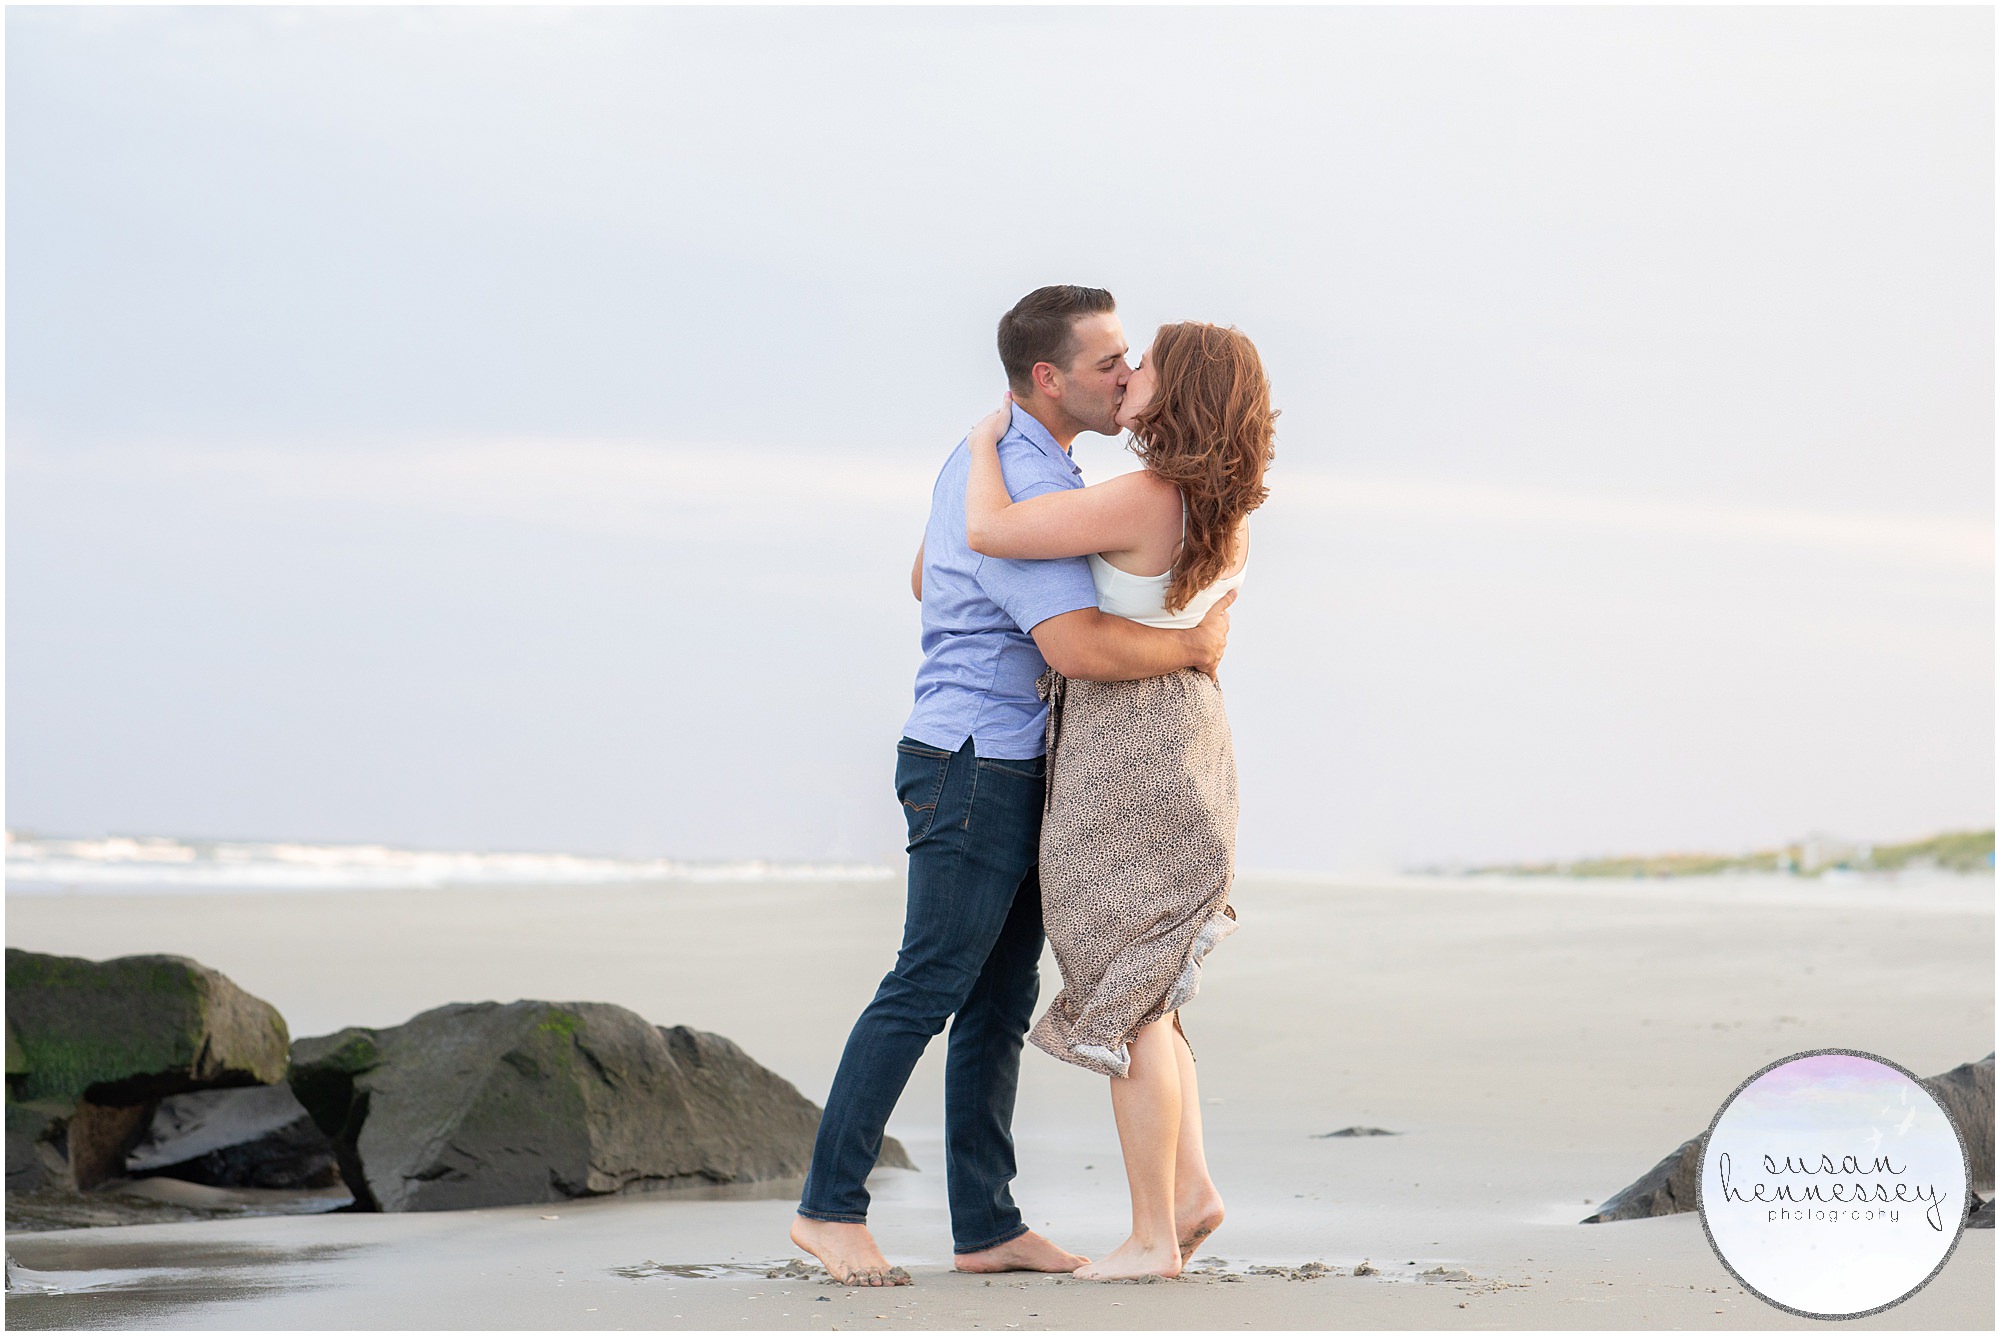 A surprise proposal at the Jersey Shore